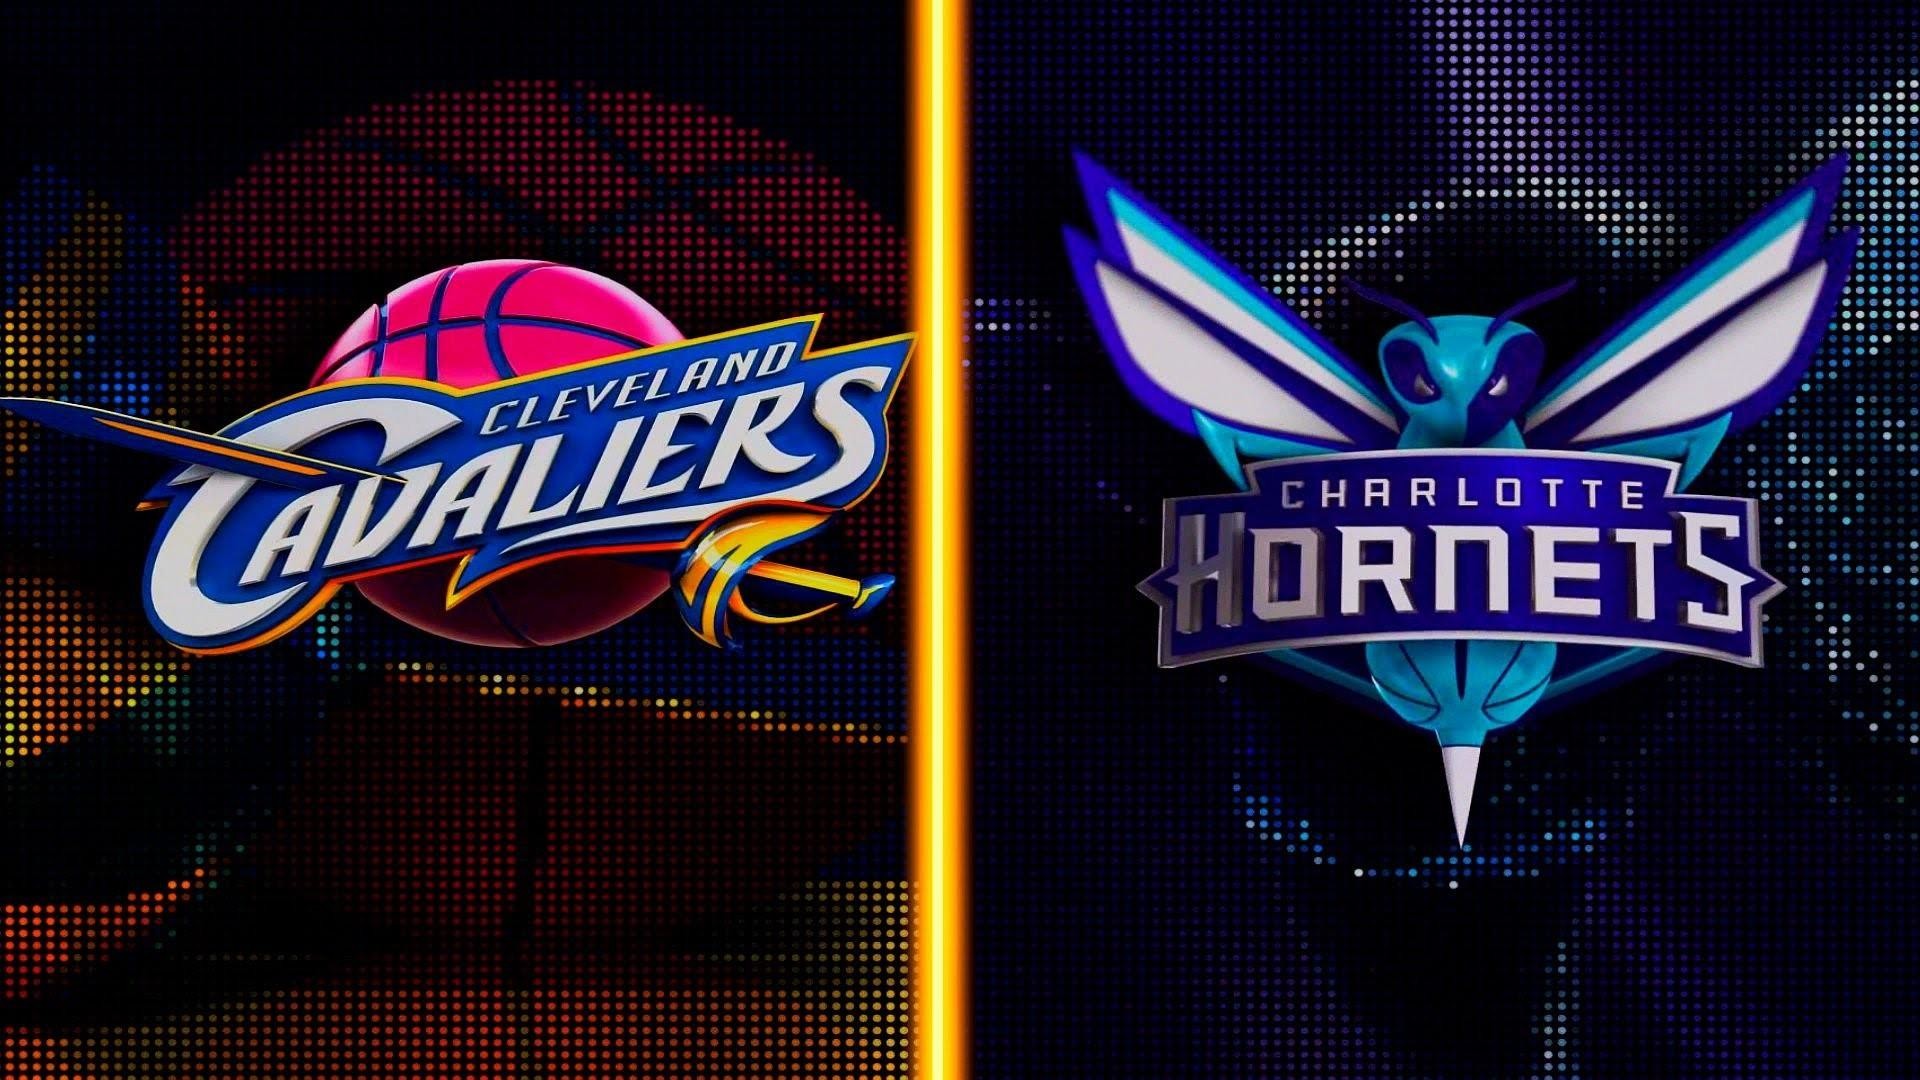 1920x1080 Charlotte hornets wallpapers 76 images